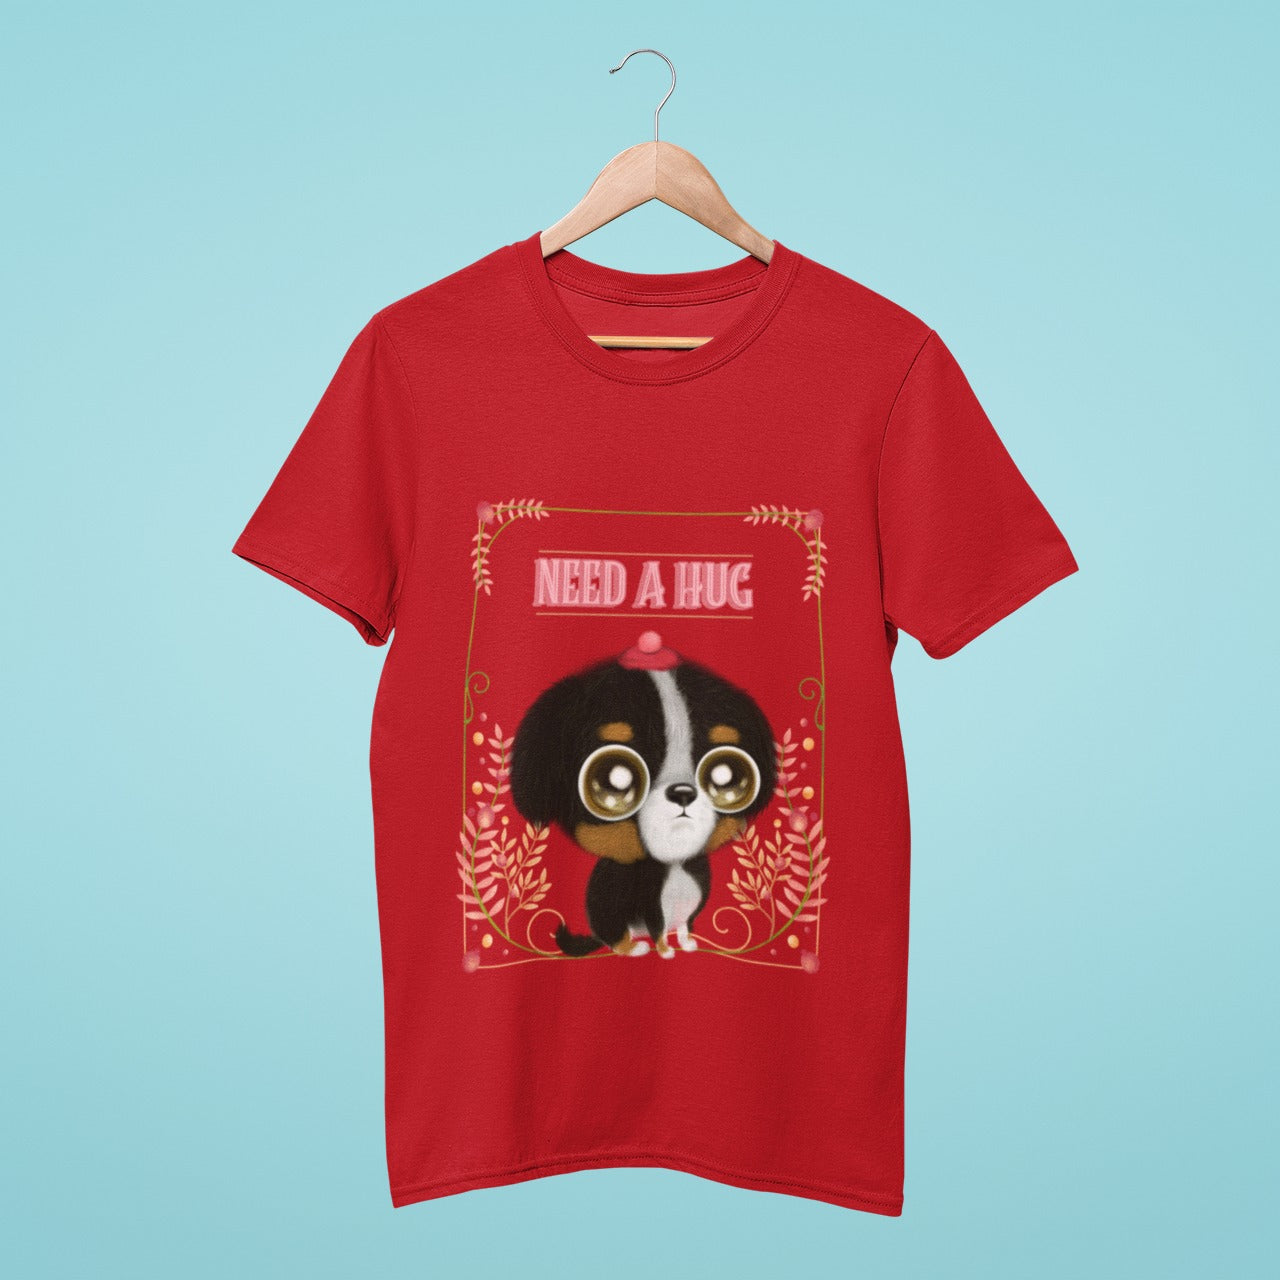 Looking for a hug? This red t-shirt with a big-headed and big-eyed puppy is just what you need! The adorable image is sure to make you smile and want to give this pup a big hug. With the title "Need a Hug" written in bold, you'll feel the love and warmth this shirt brings.